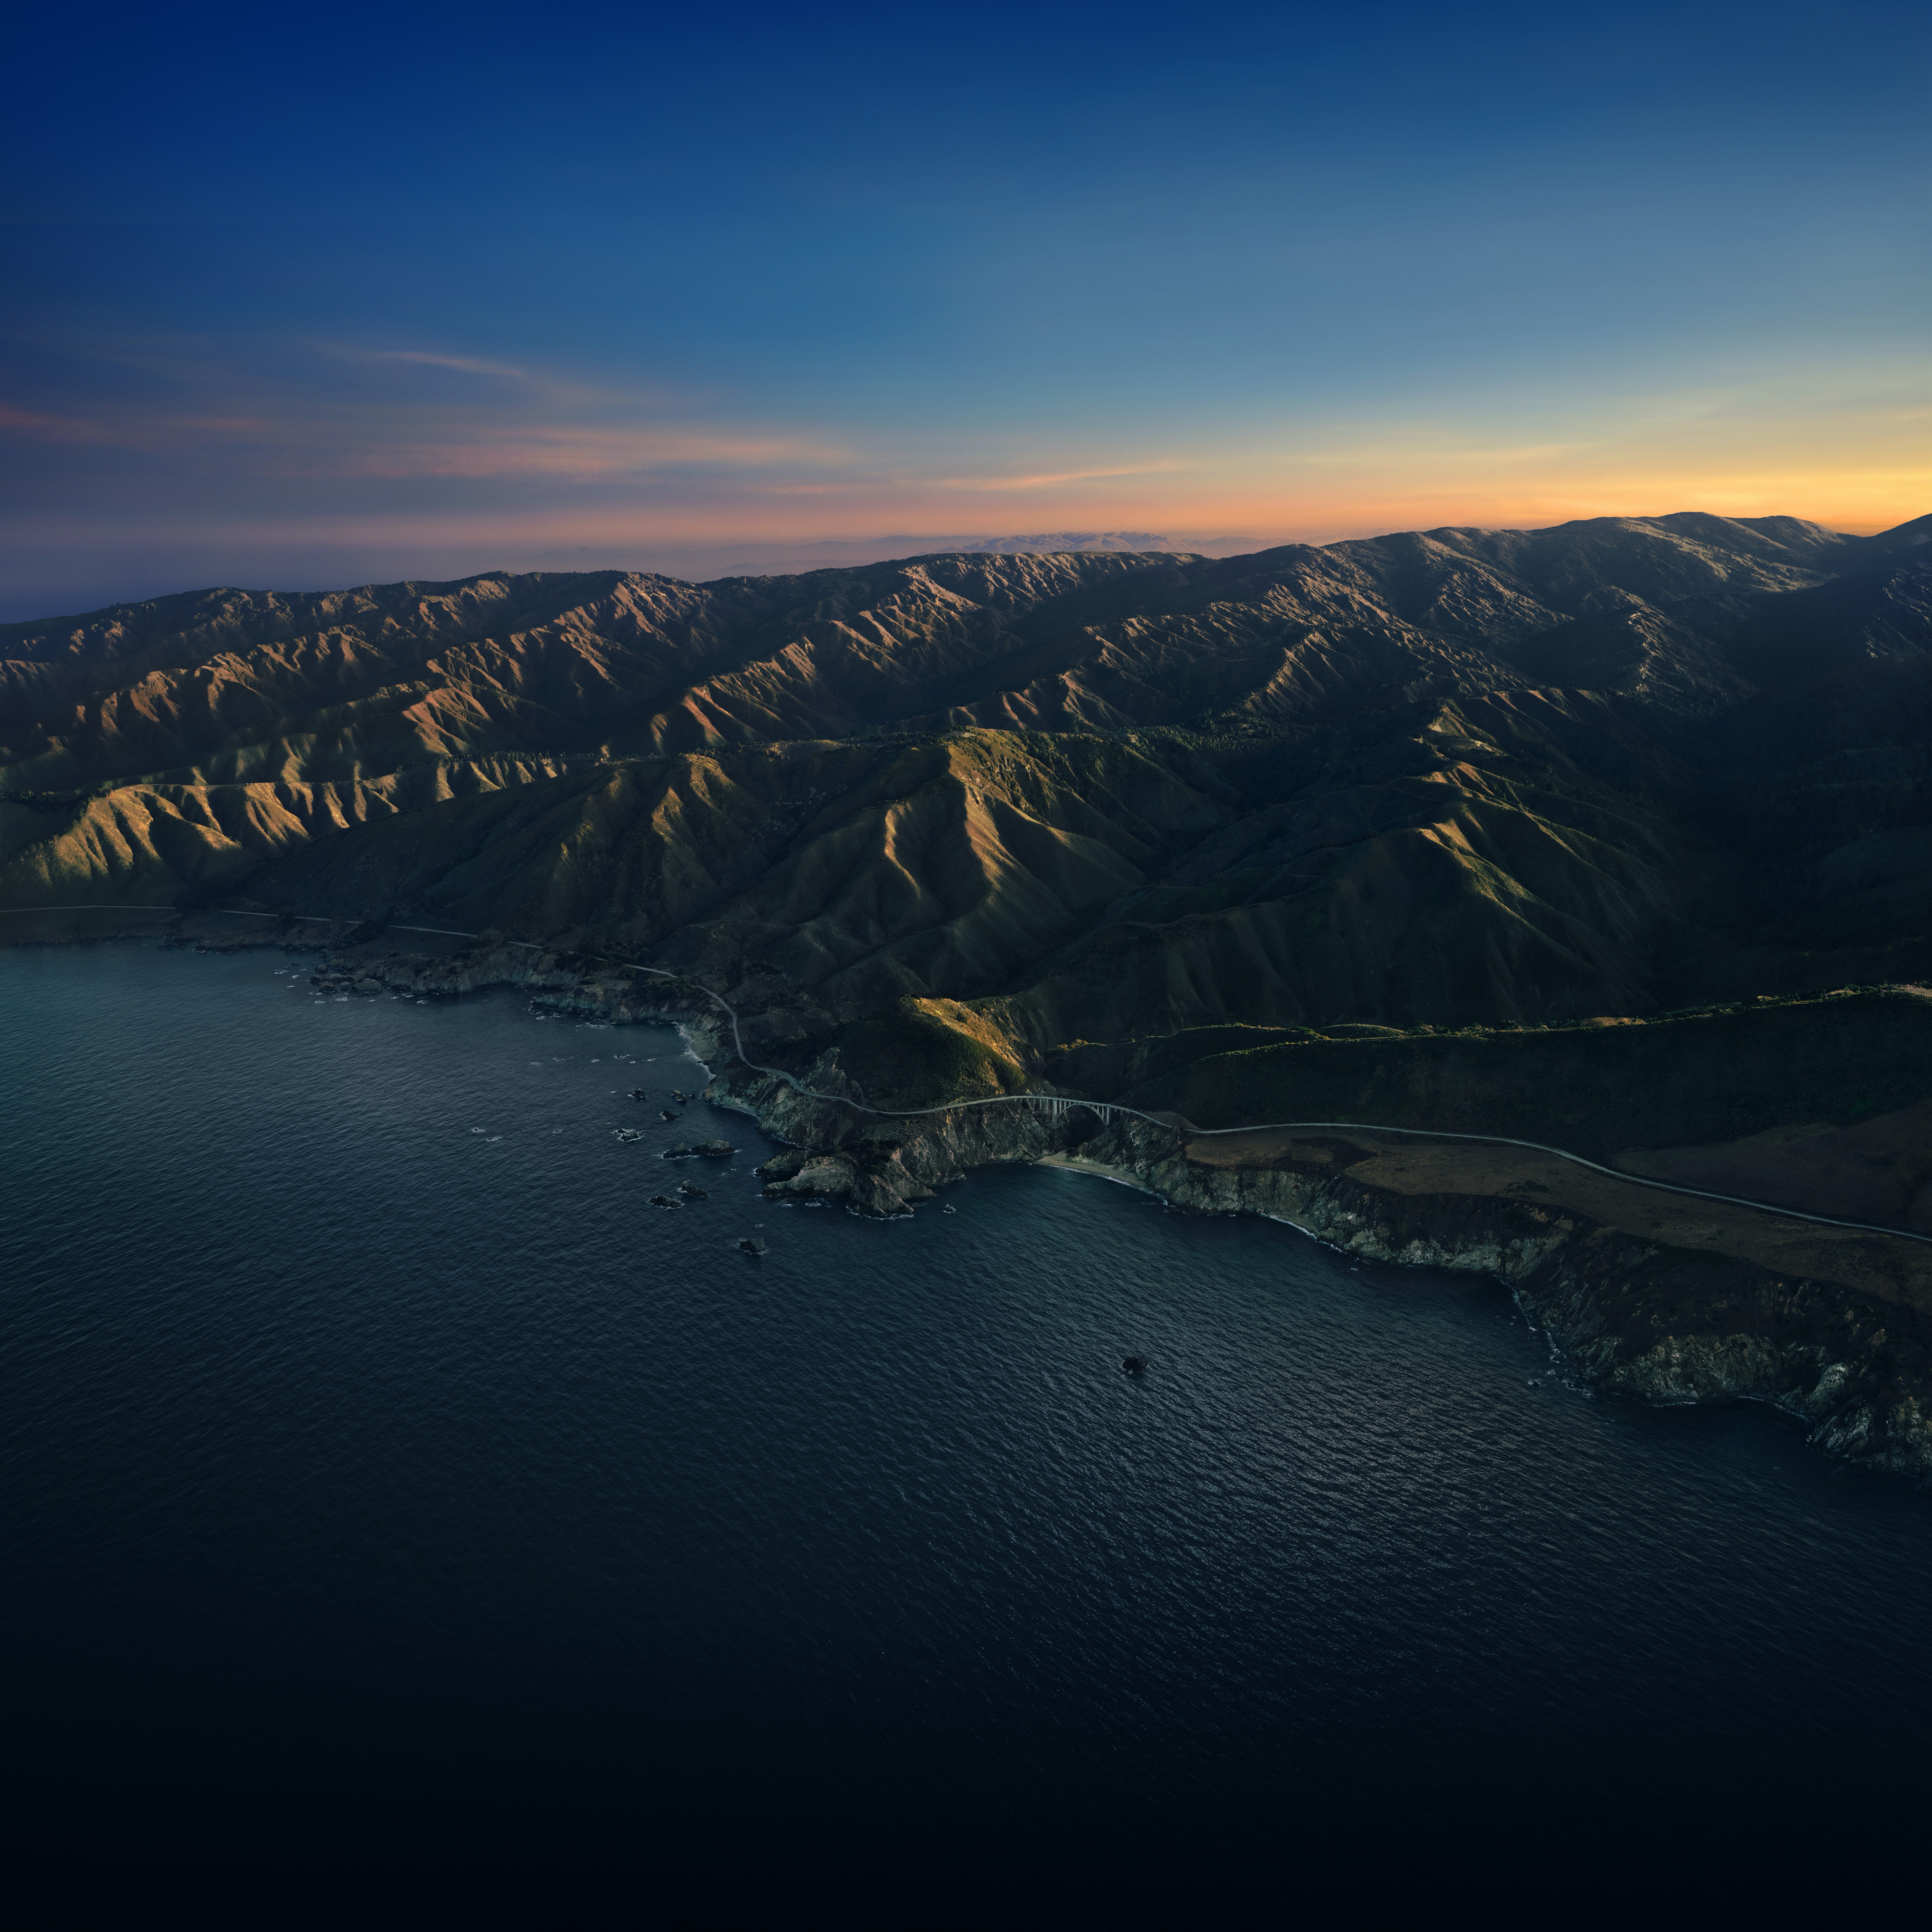 macOS Big Sur wallpapers for desktop, iPhone, and iPad